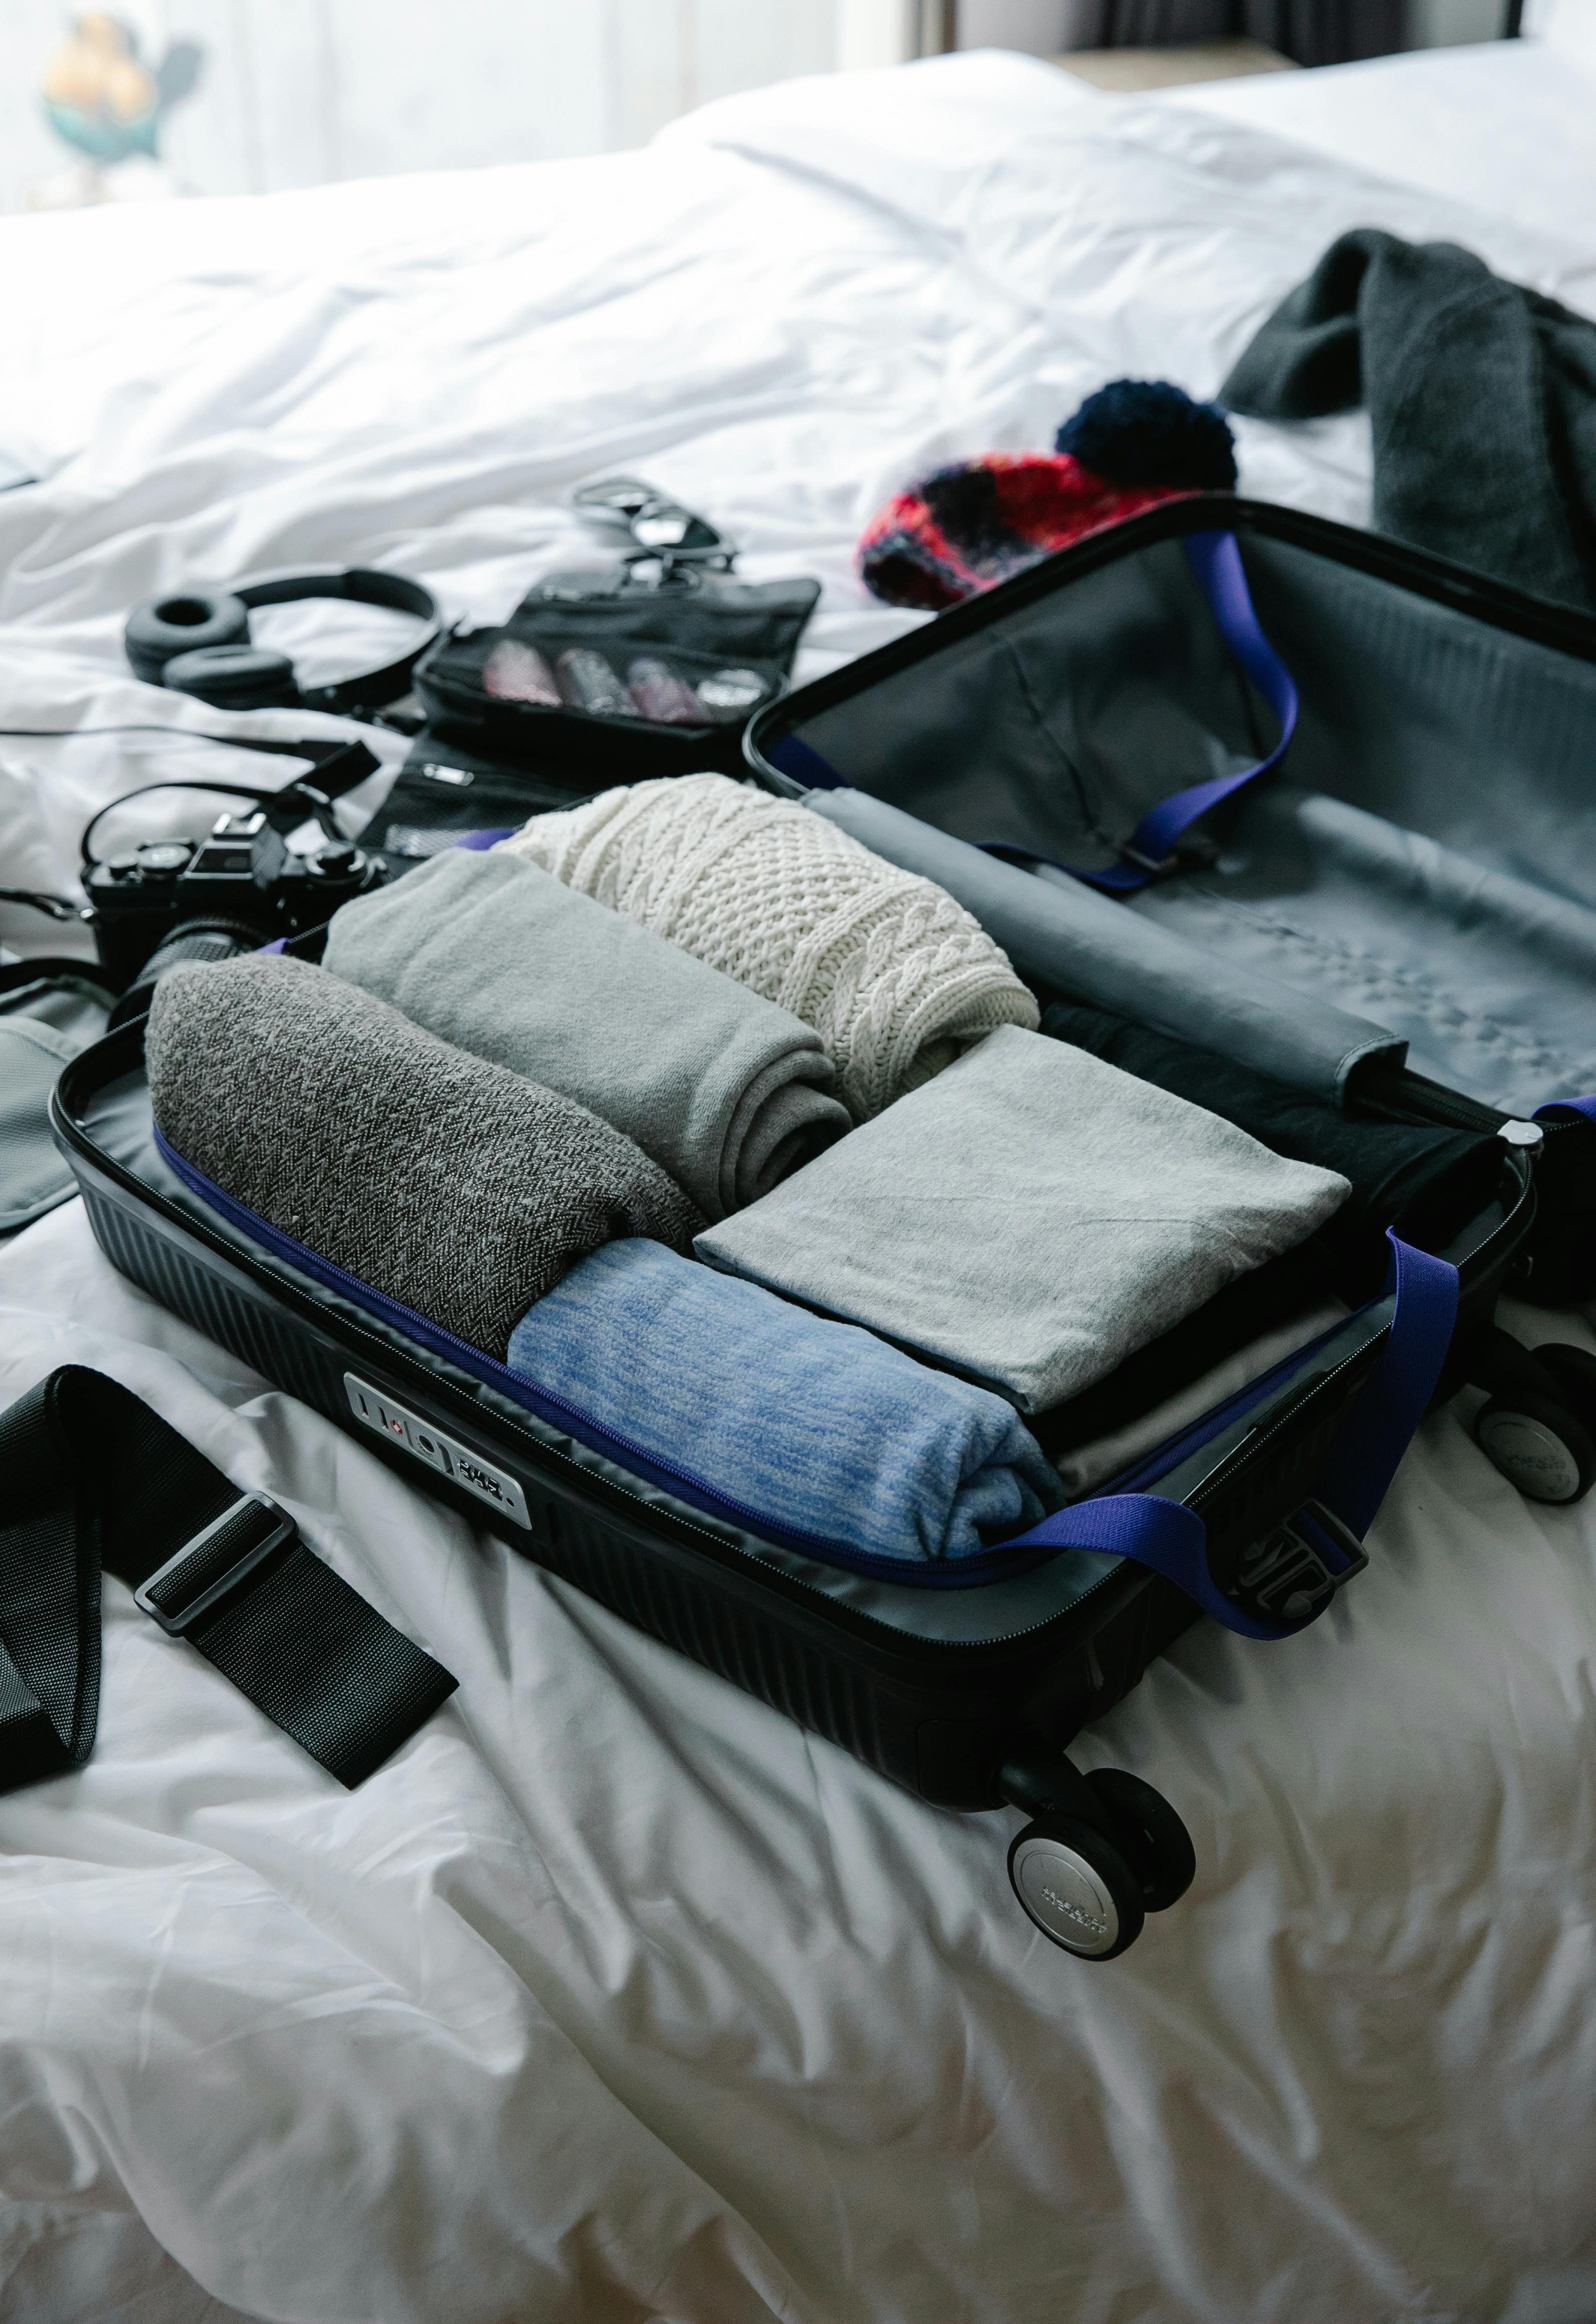 A suitcase being packed | Source: Pexels